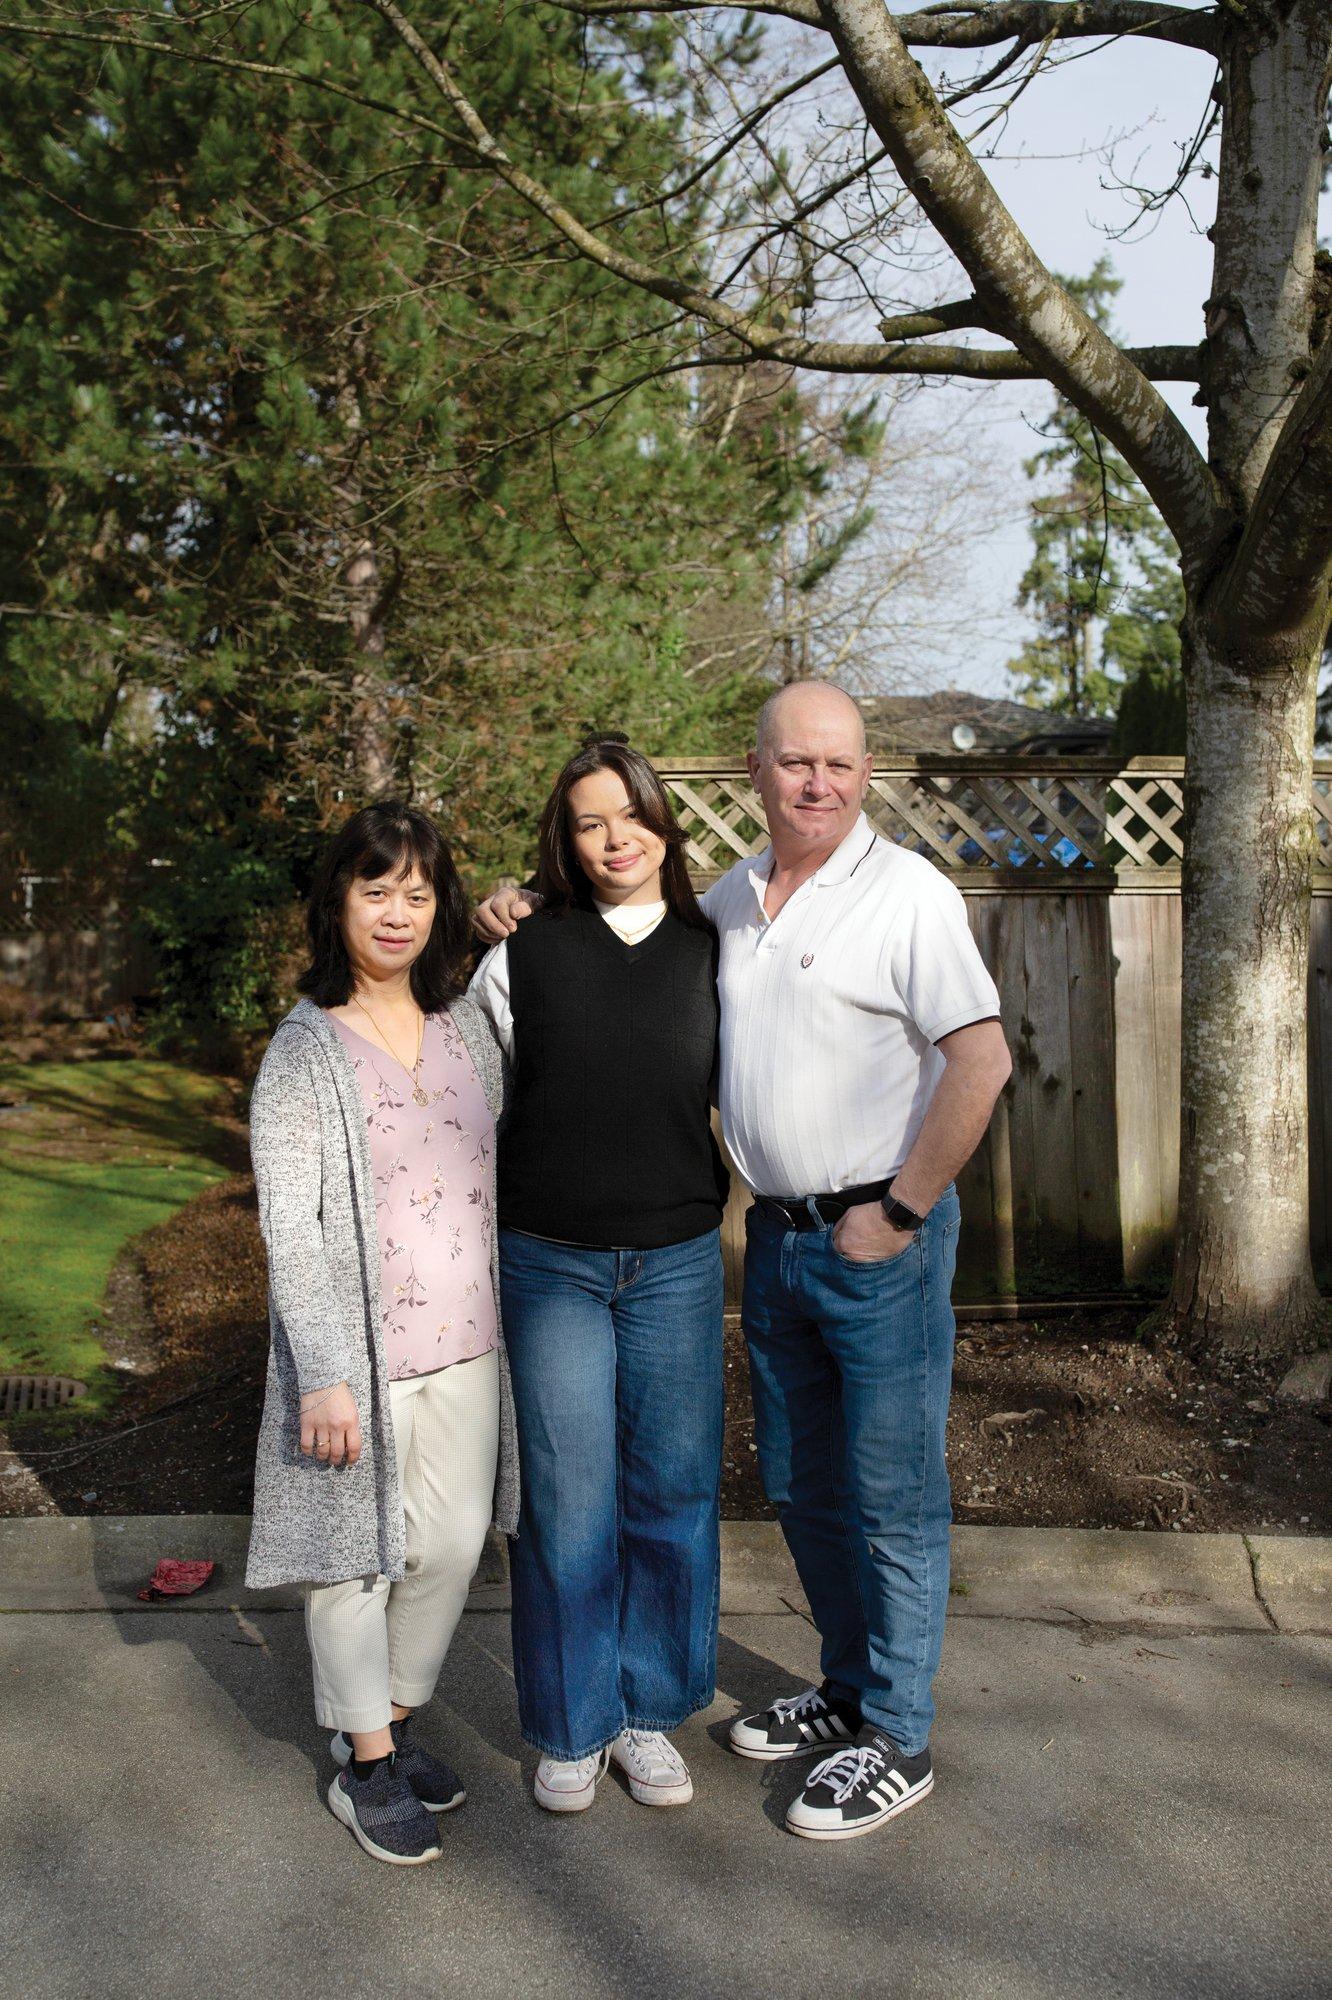 Kameela Nash (center) poses for a photo with her father Richard Nash (right) and her mother Lynda Nash (left) at their home in Surrey, B.C. on February 4, 2024.